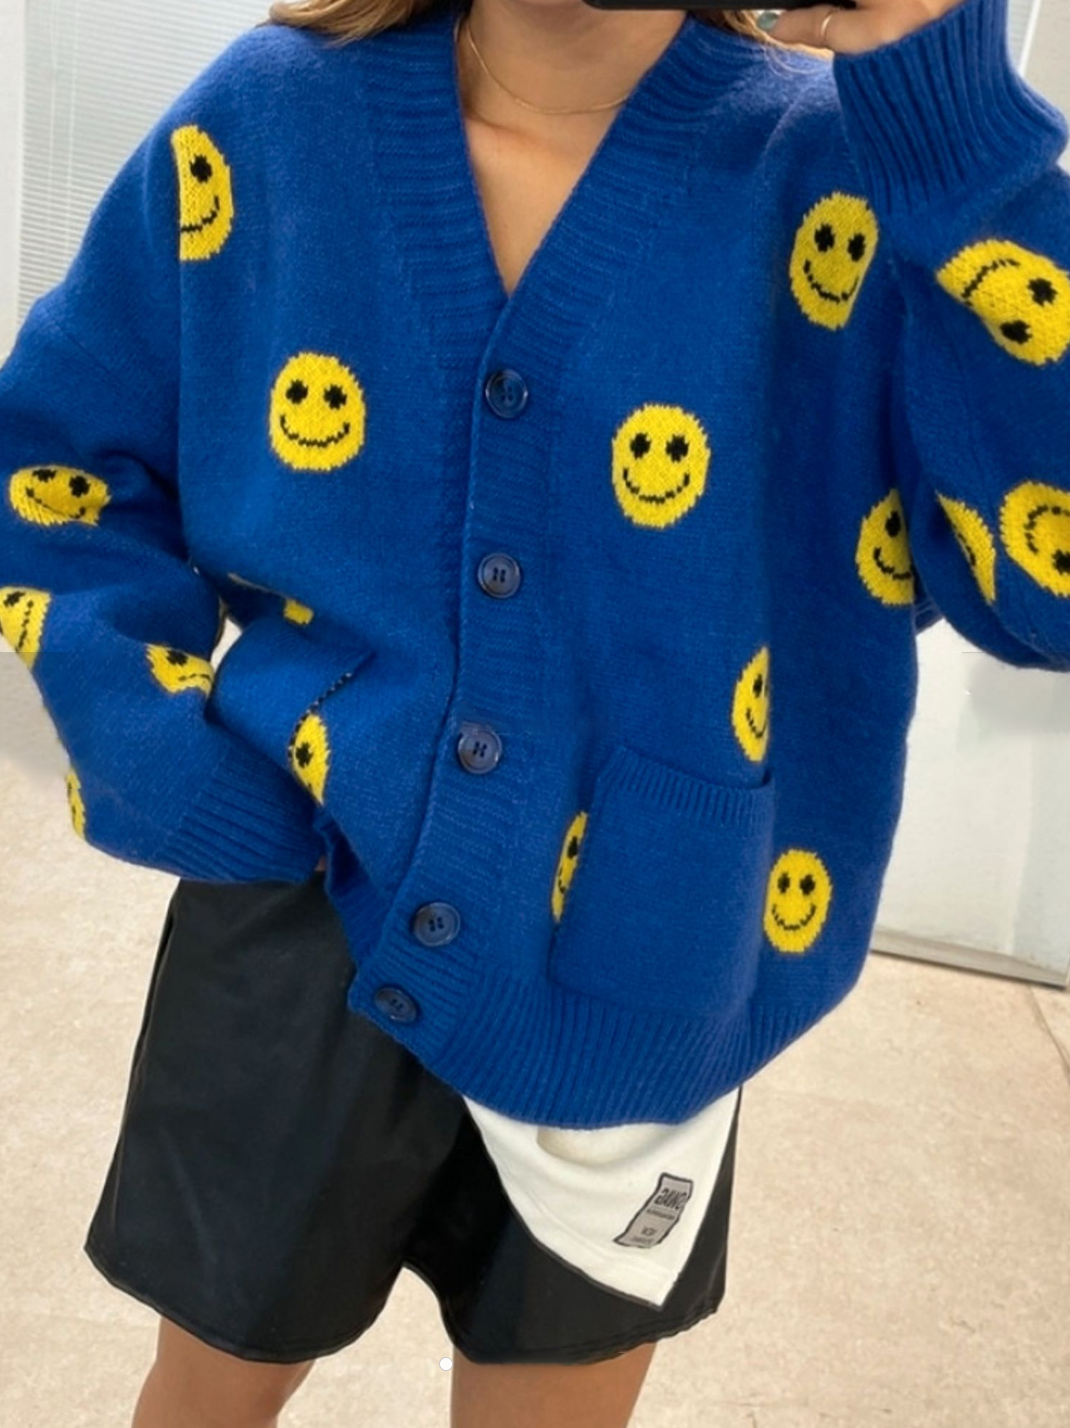 All Over the Smile Cardigan 😊